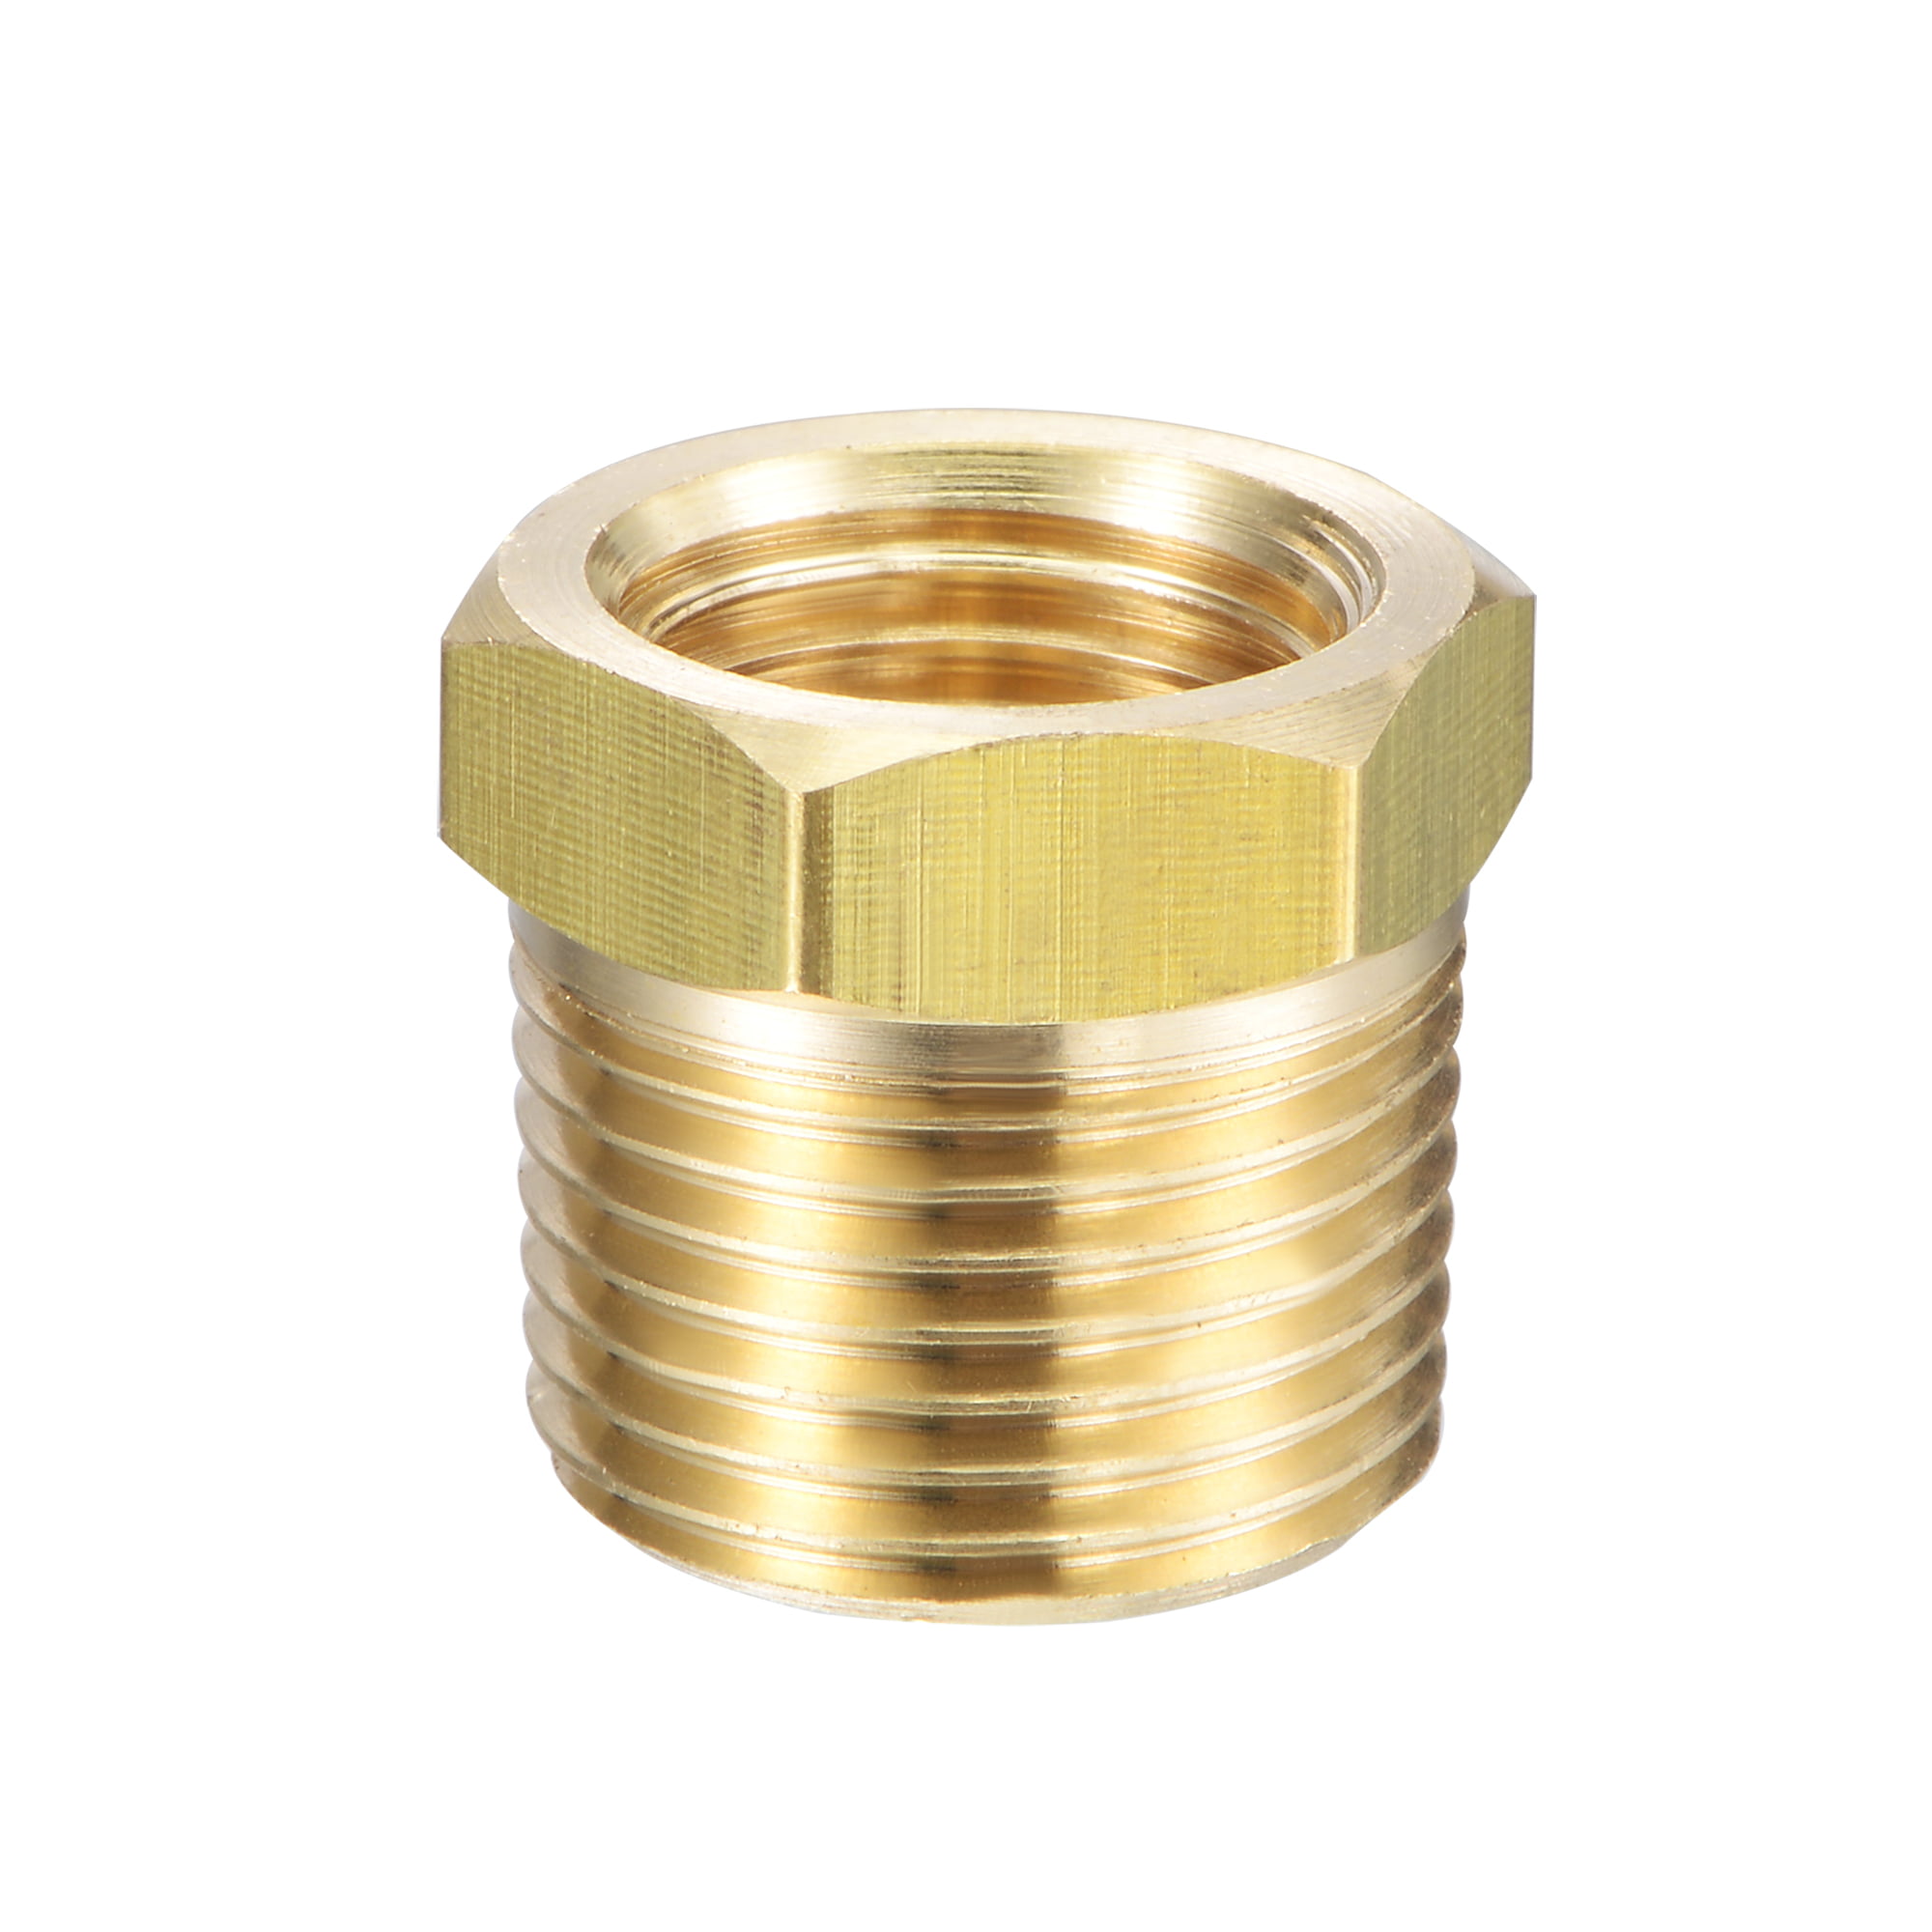 Brass Pipe fitting coupling reducer male Gauge adaptor water oil pressure joiner 